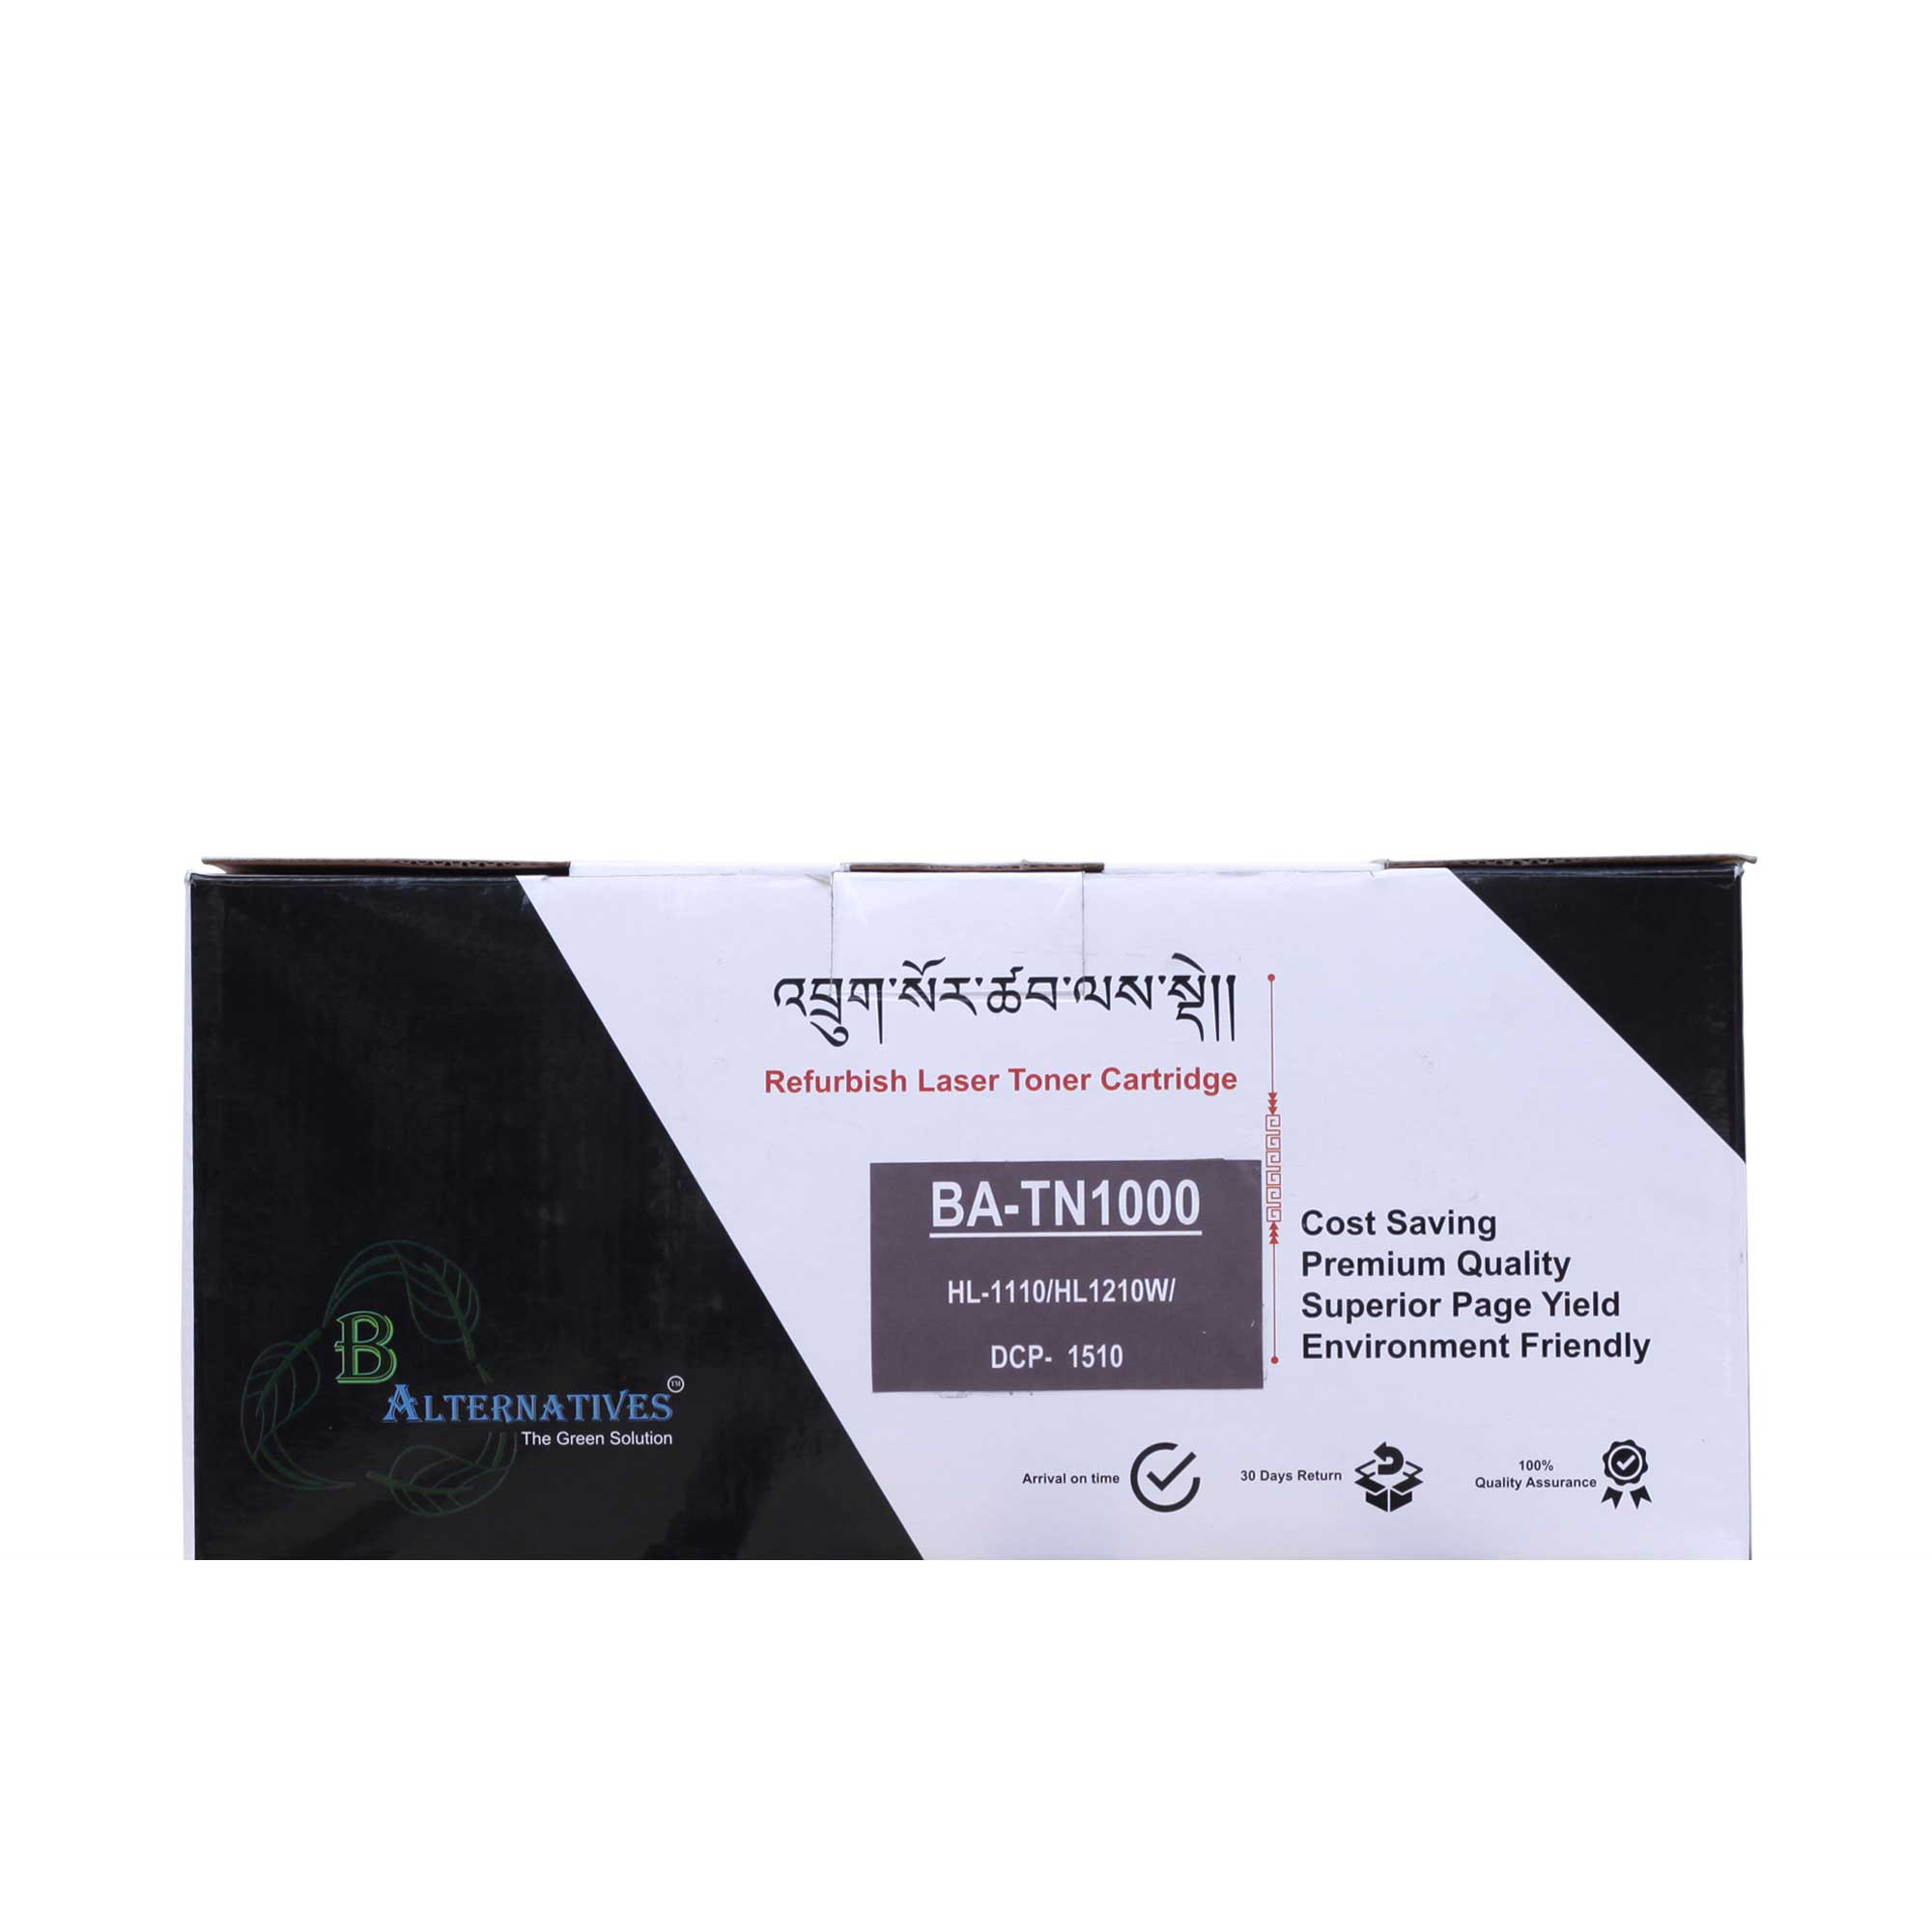 Bhutan Alternative - Refurbished Brother Printer Cartridge/Toner Ink | Cartridge Number TN-1000, for use in HL-1110, HL-1210W, DCP-1510, DCP-1601W, MFC-1810